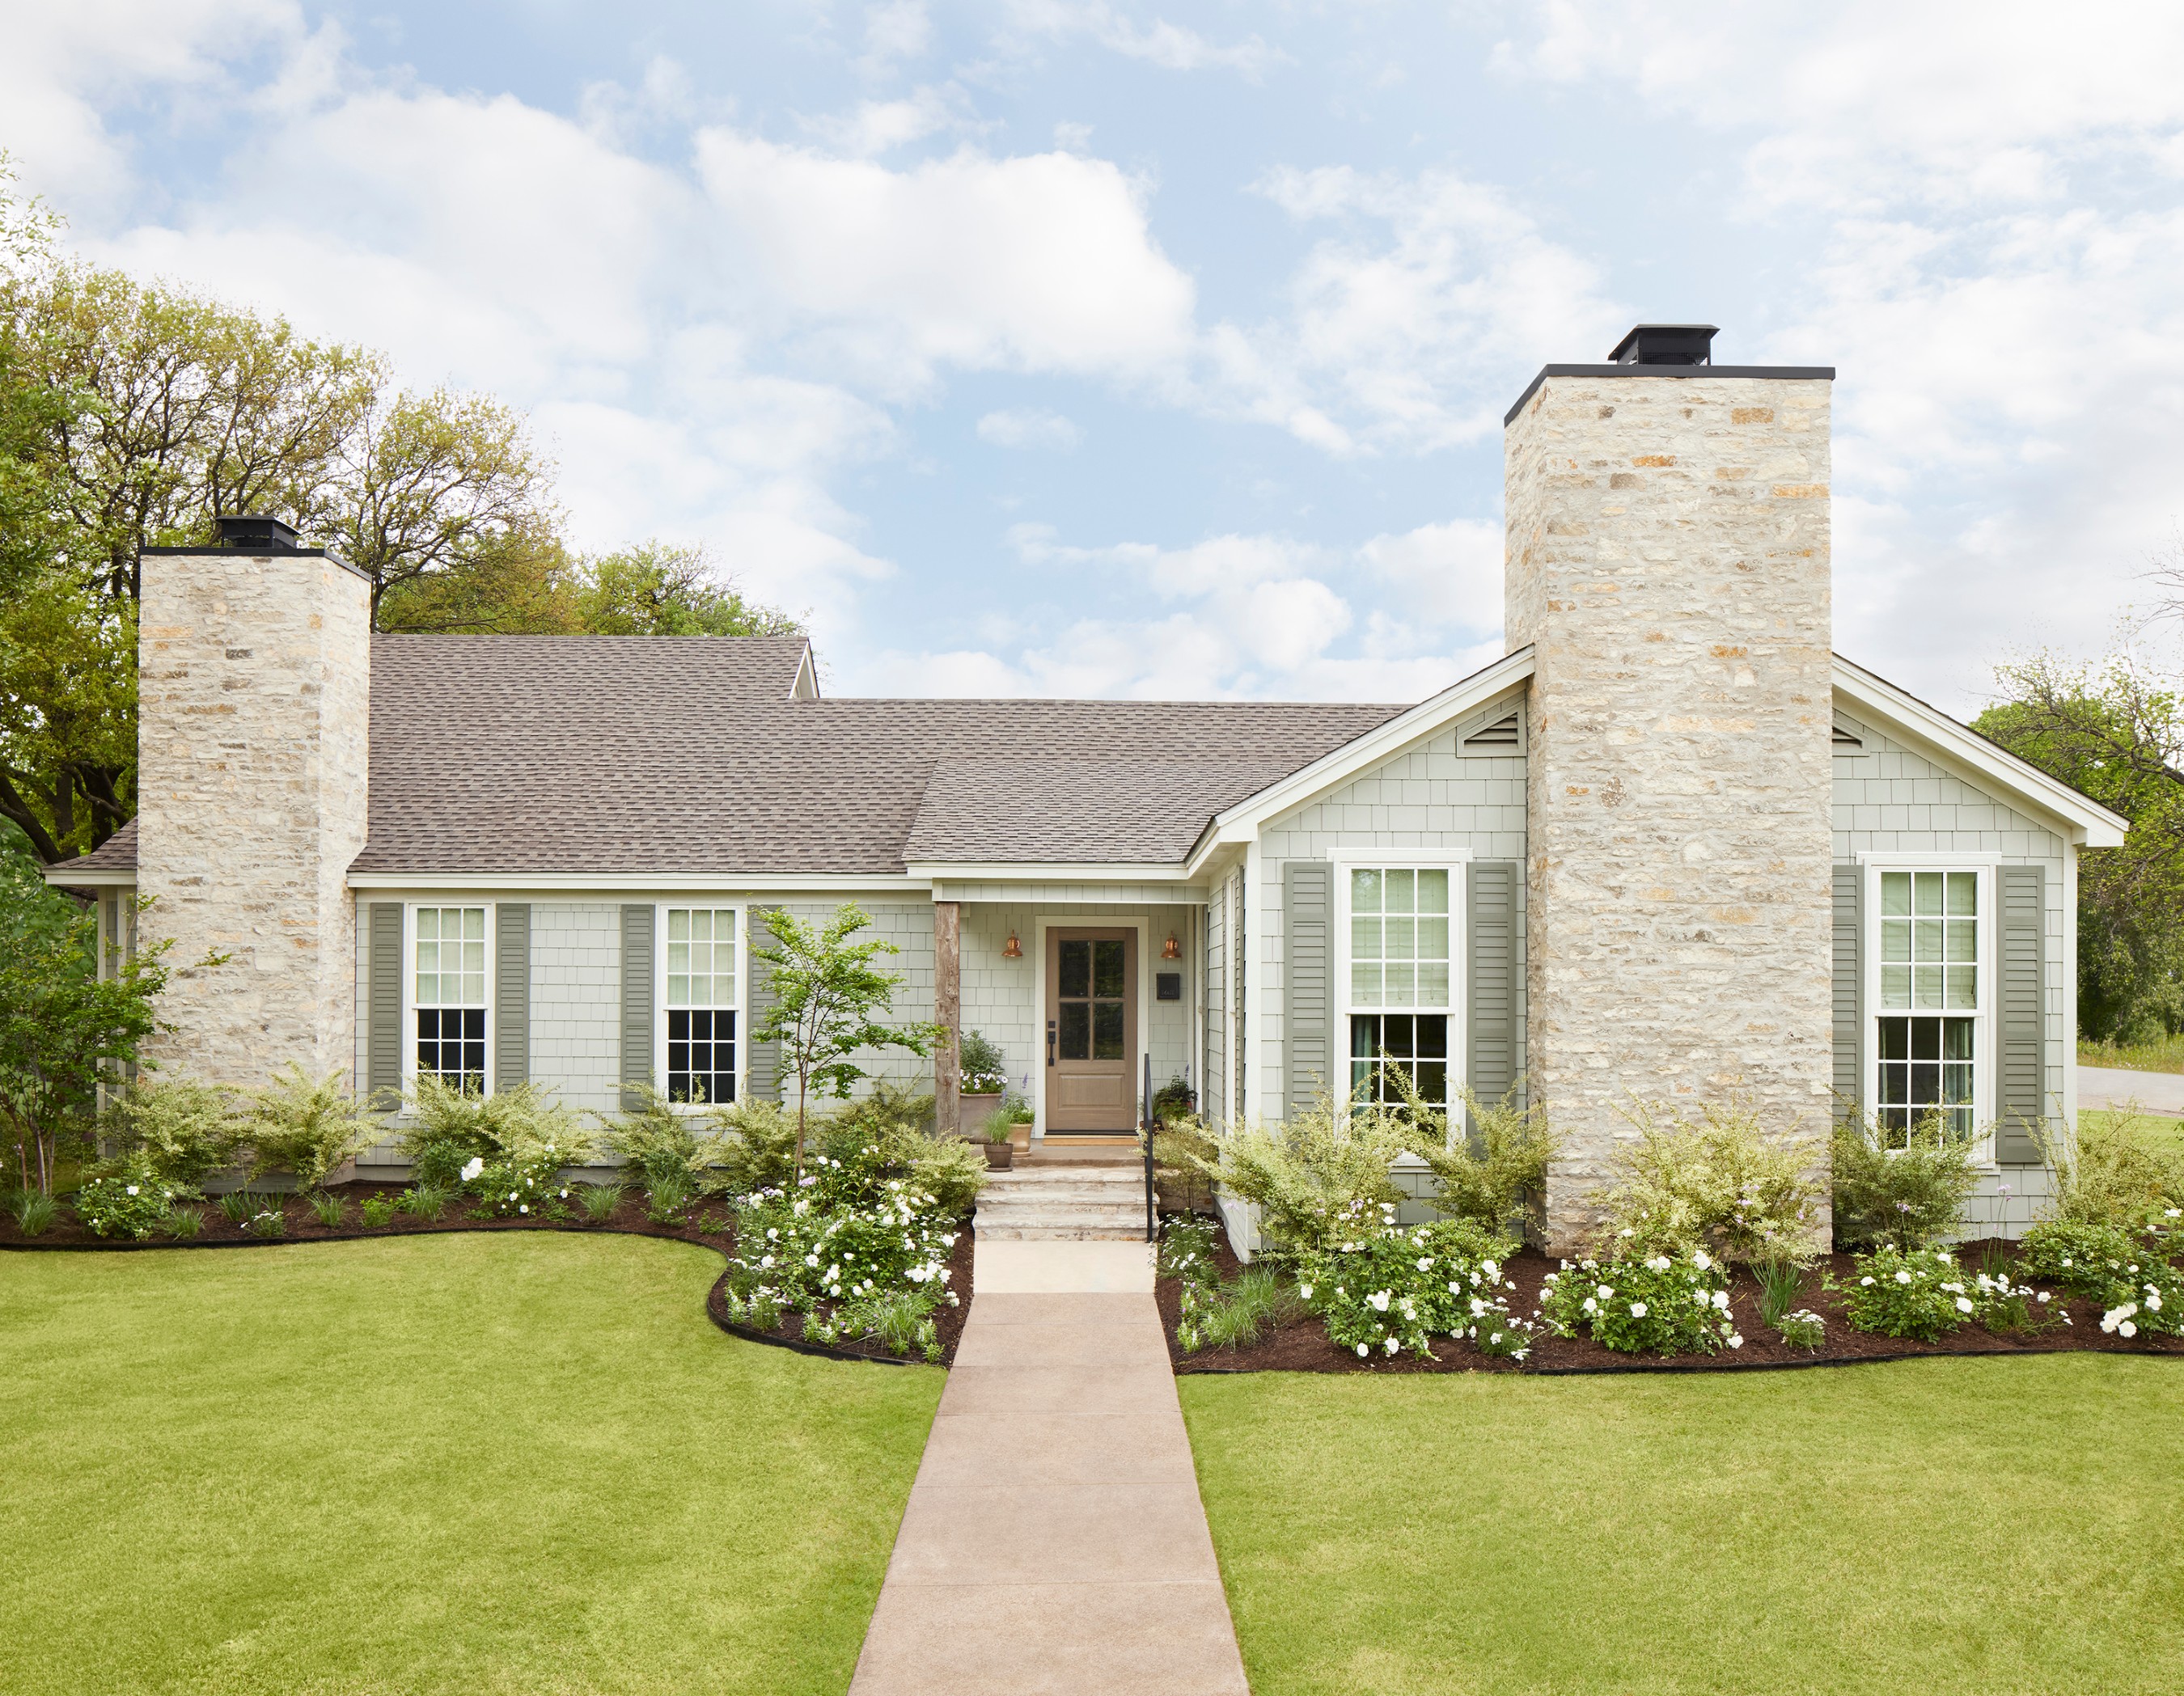 The Minty Green home with Hardie® Shingle, featured on Fixer Upper on HGTV.